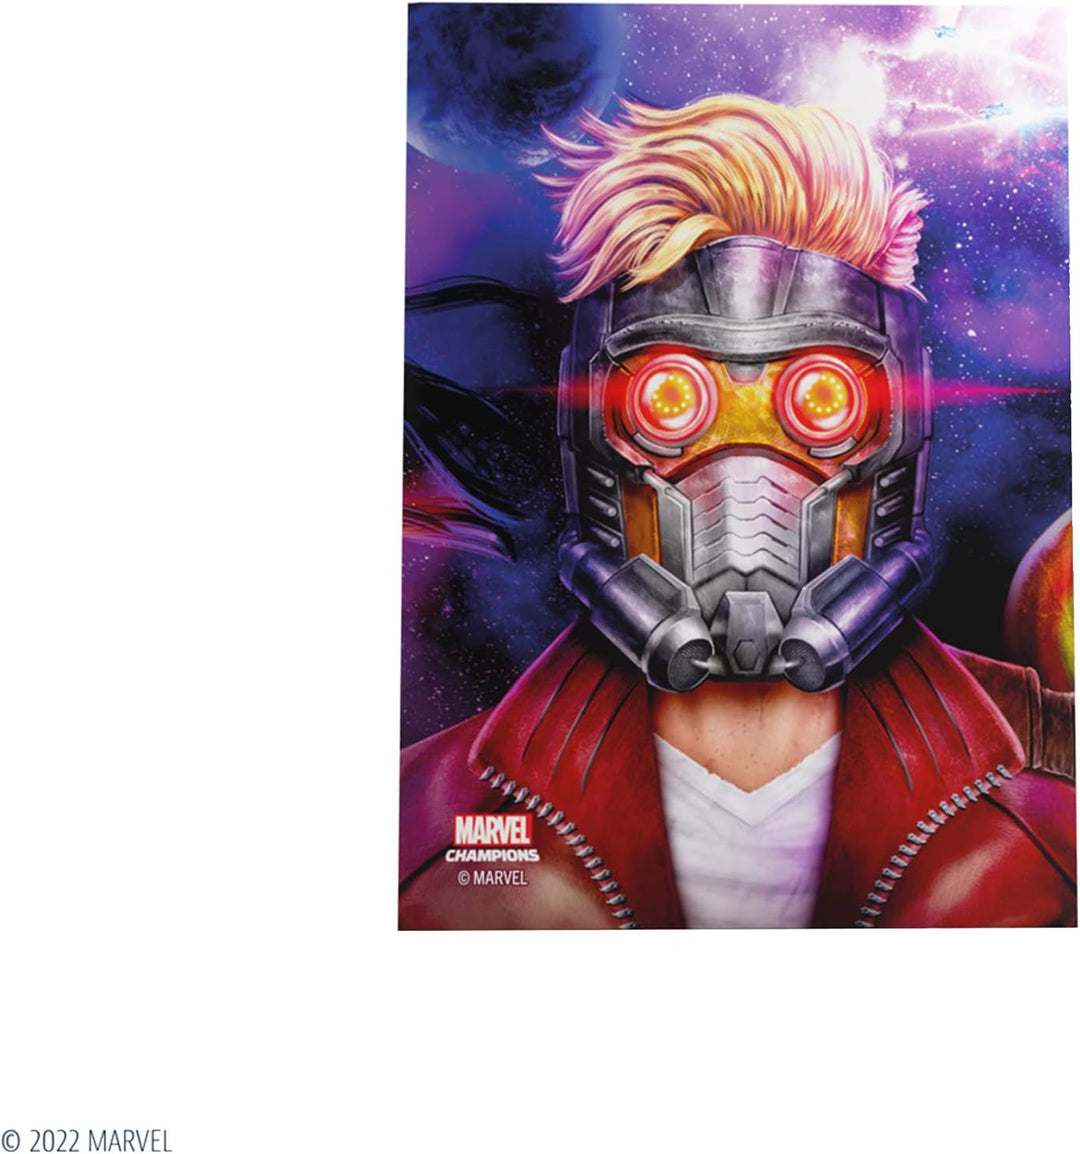 Gamegenic Marvel Champions The Card Game Offizielles Star-Lord Fine Art Sleeves Pac